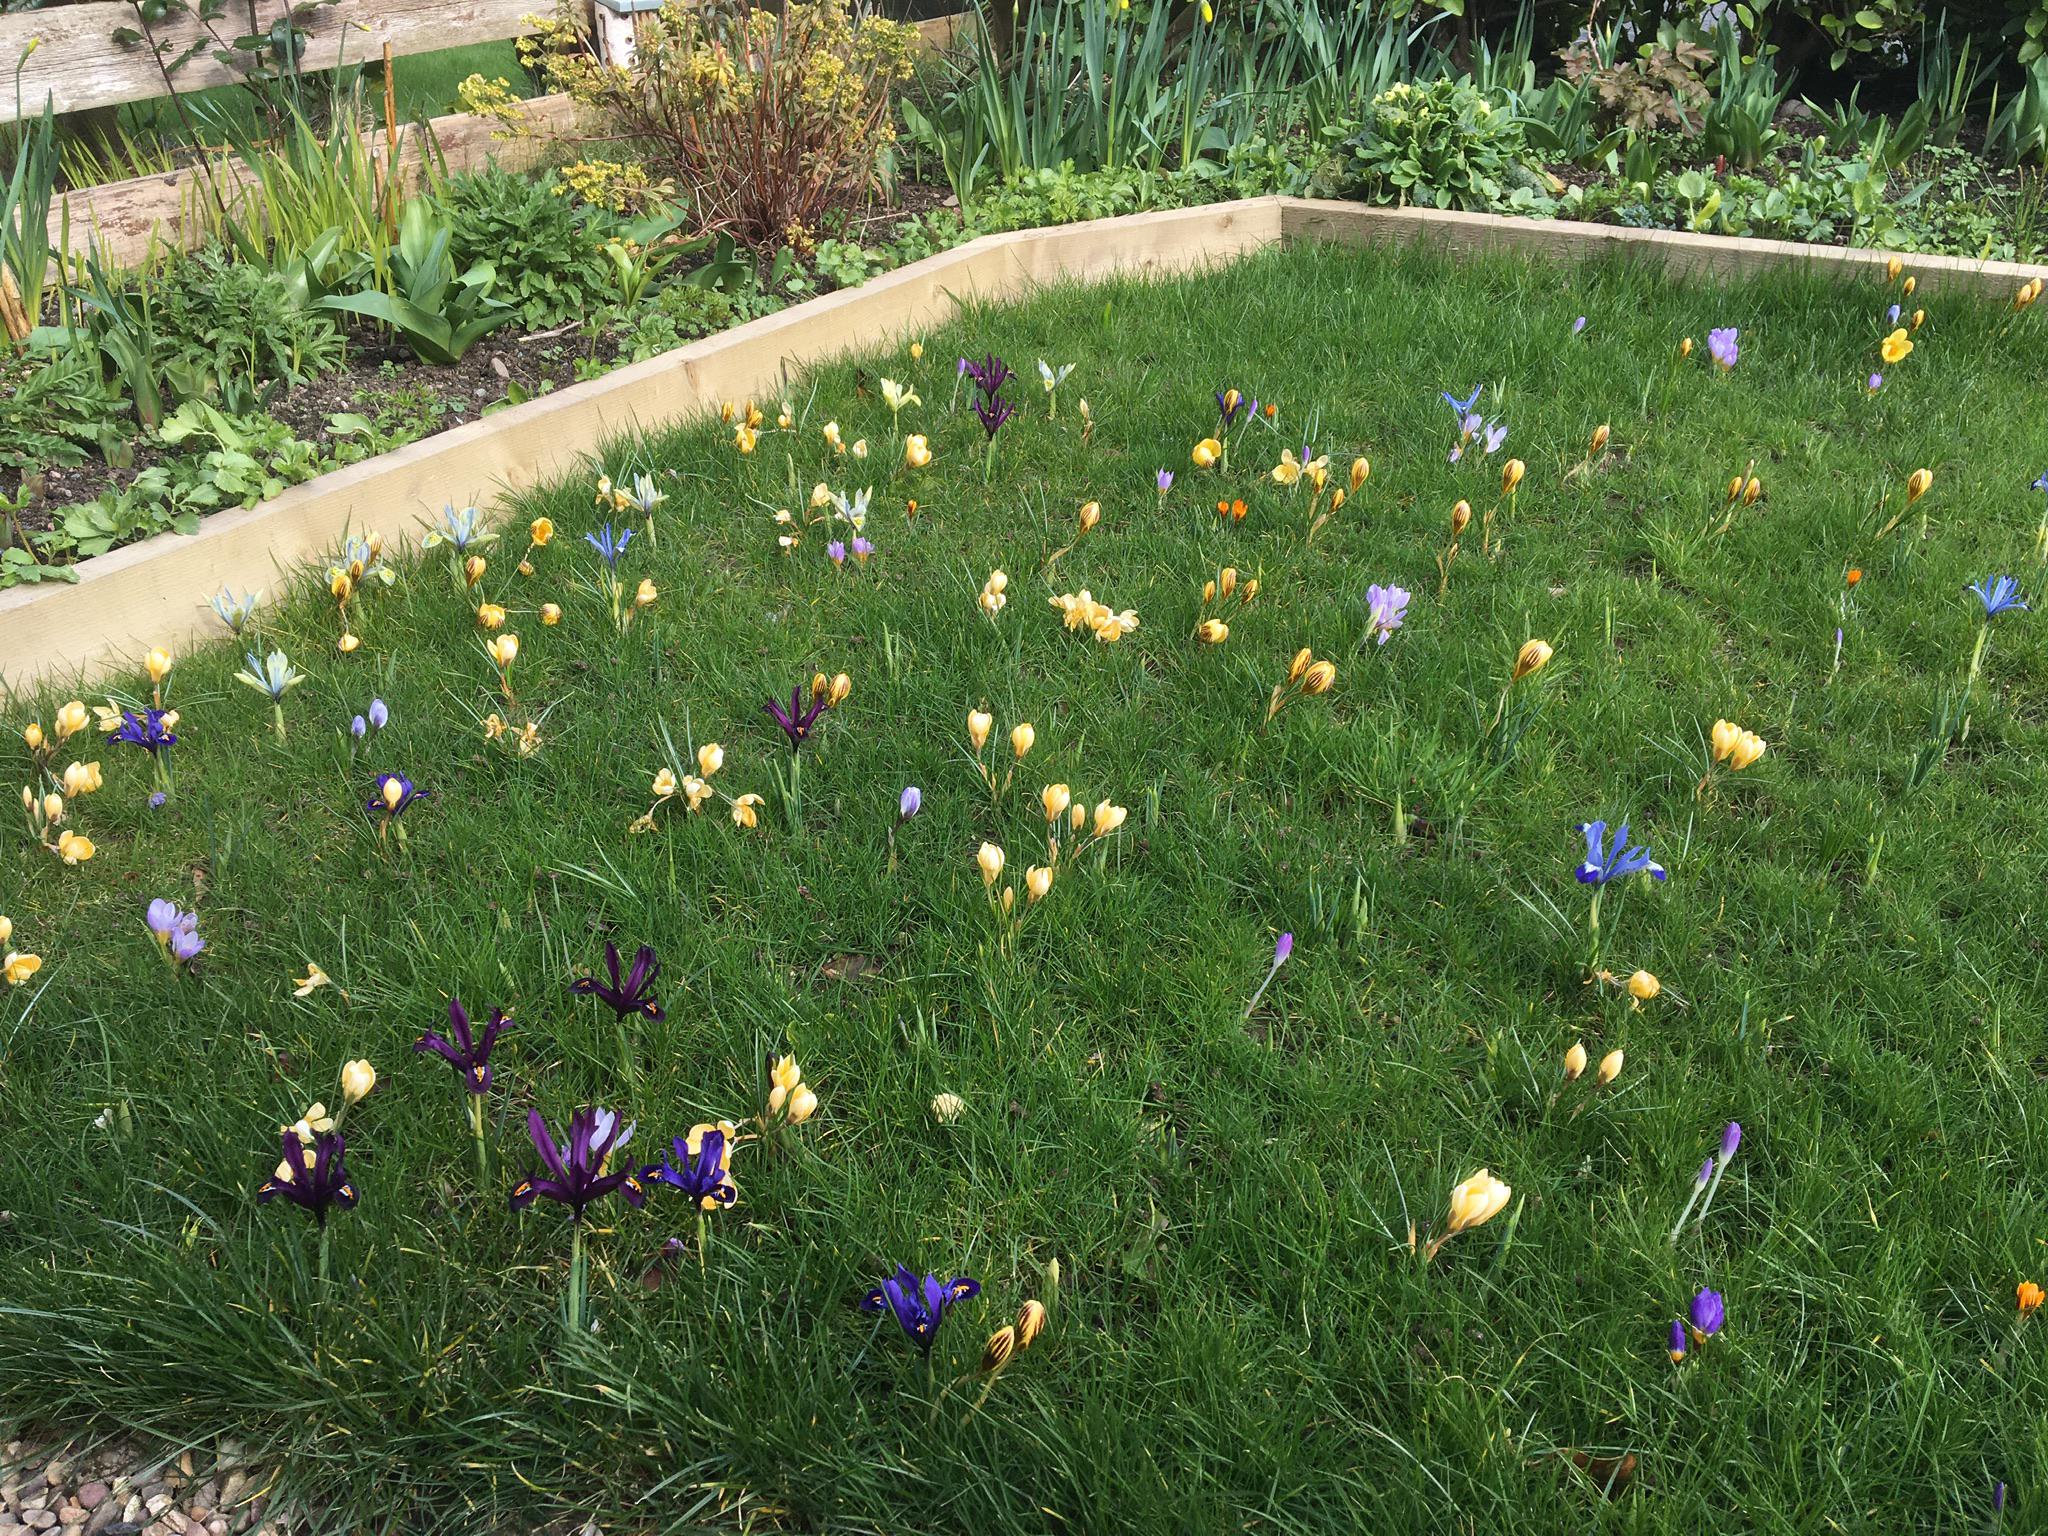 I planted some Iris and Crocus bulbs under my lawn in late Autumn